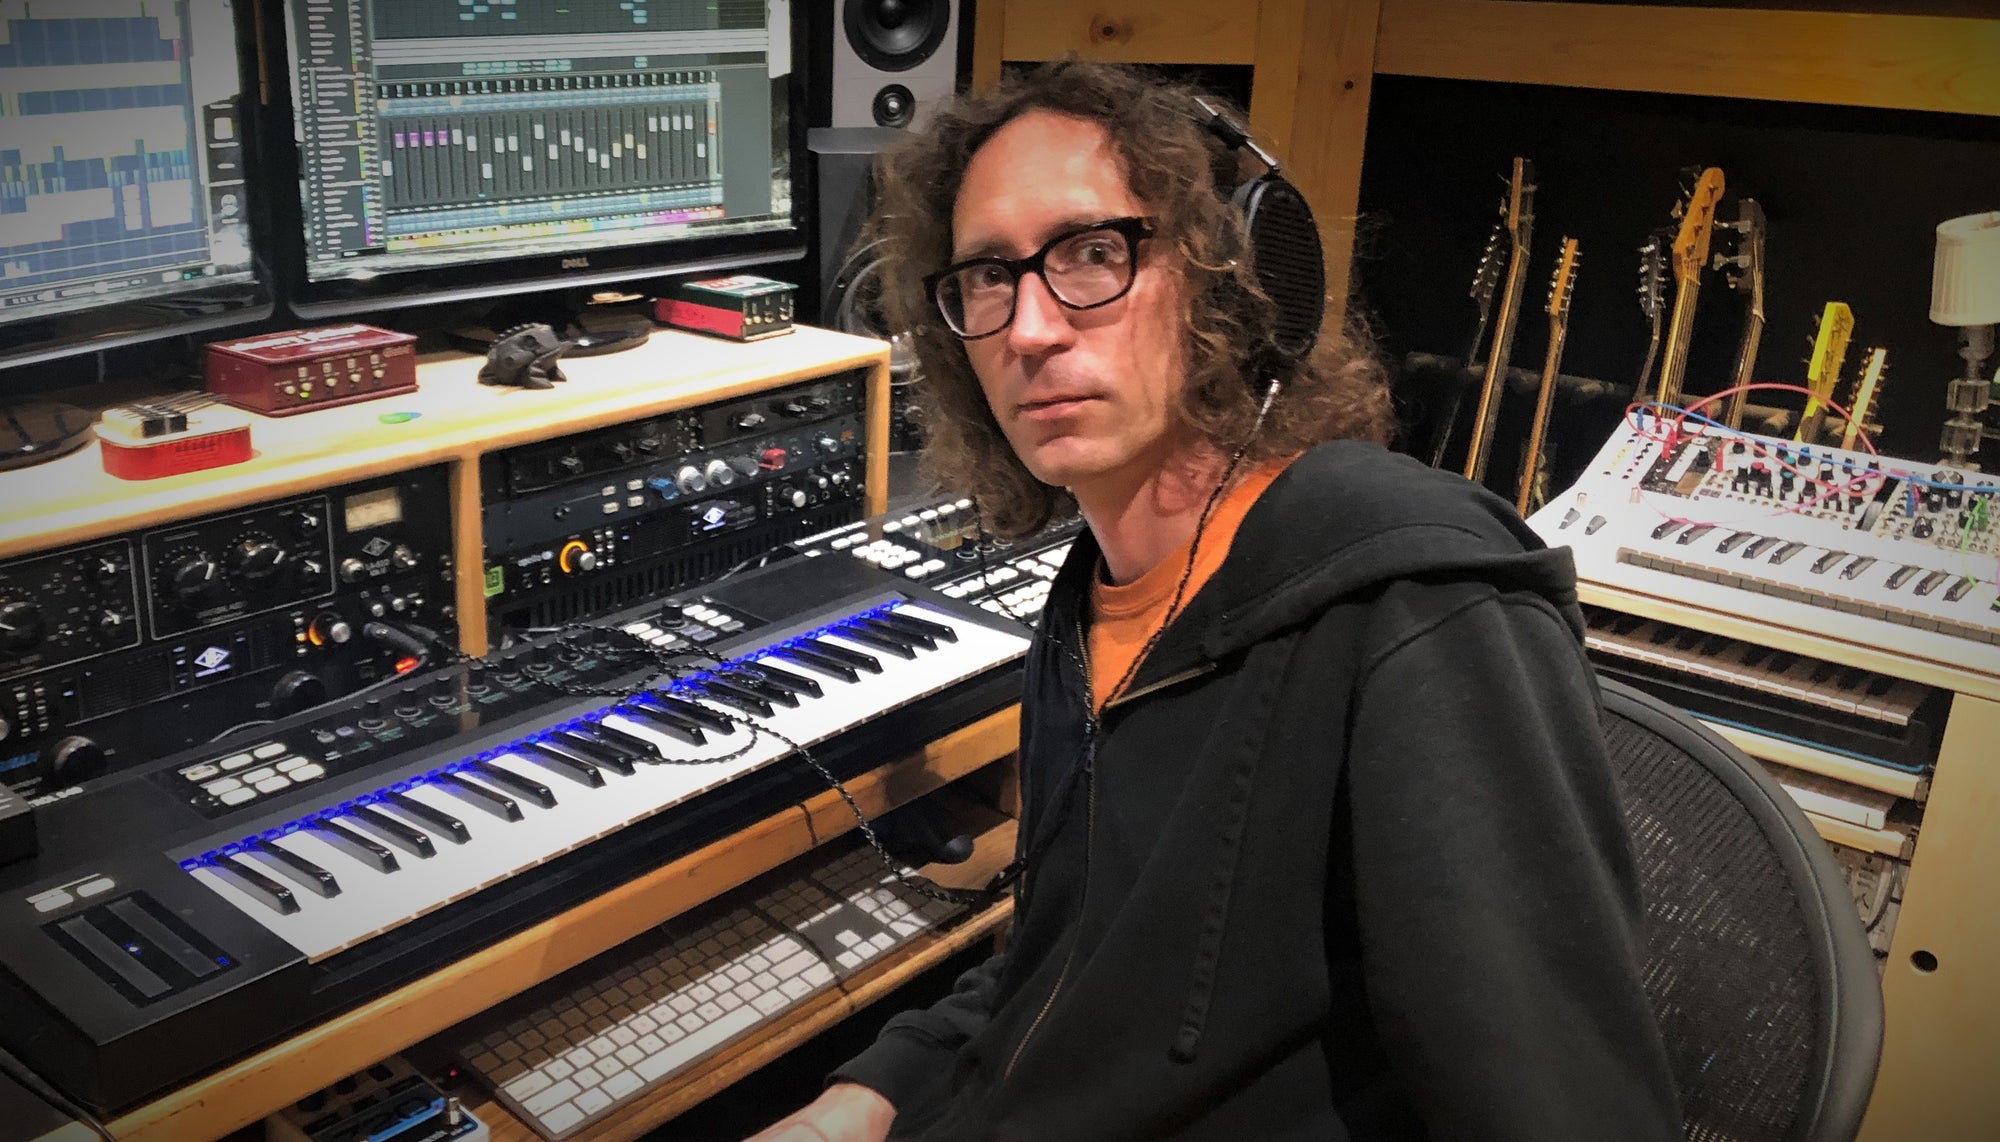 Audeze chats with producer and musician Filip Nikolic